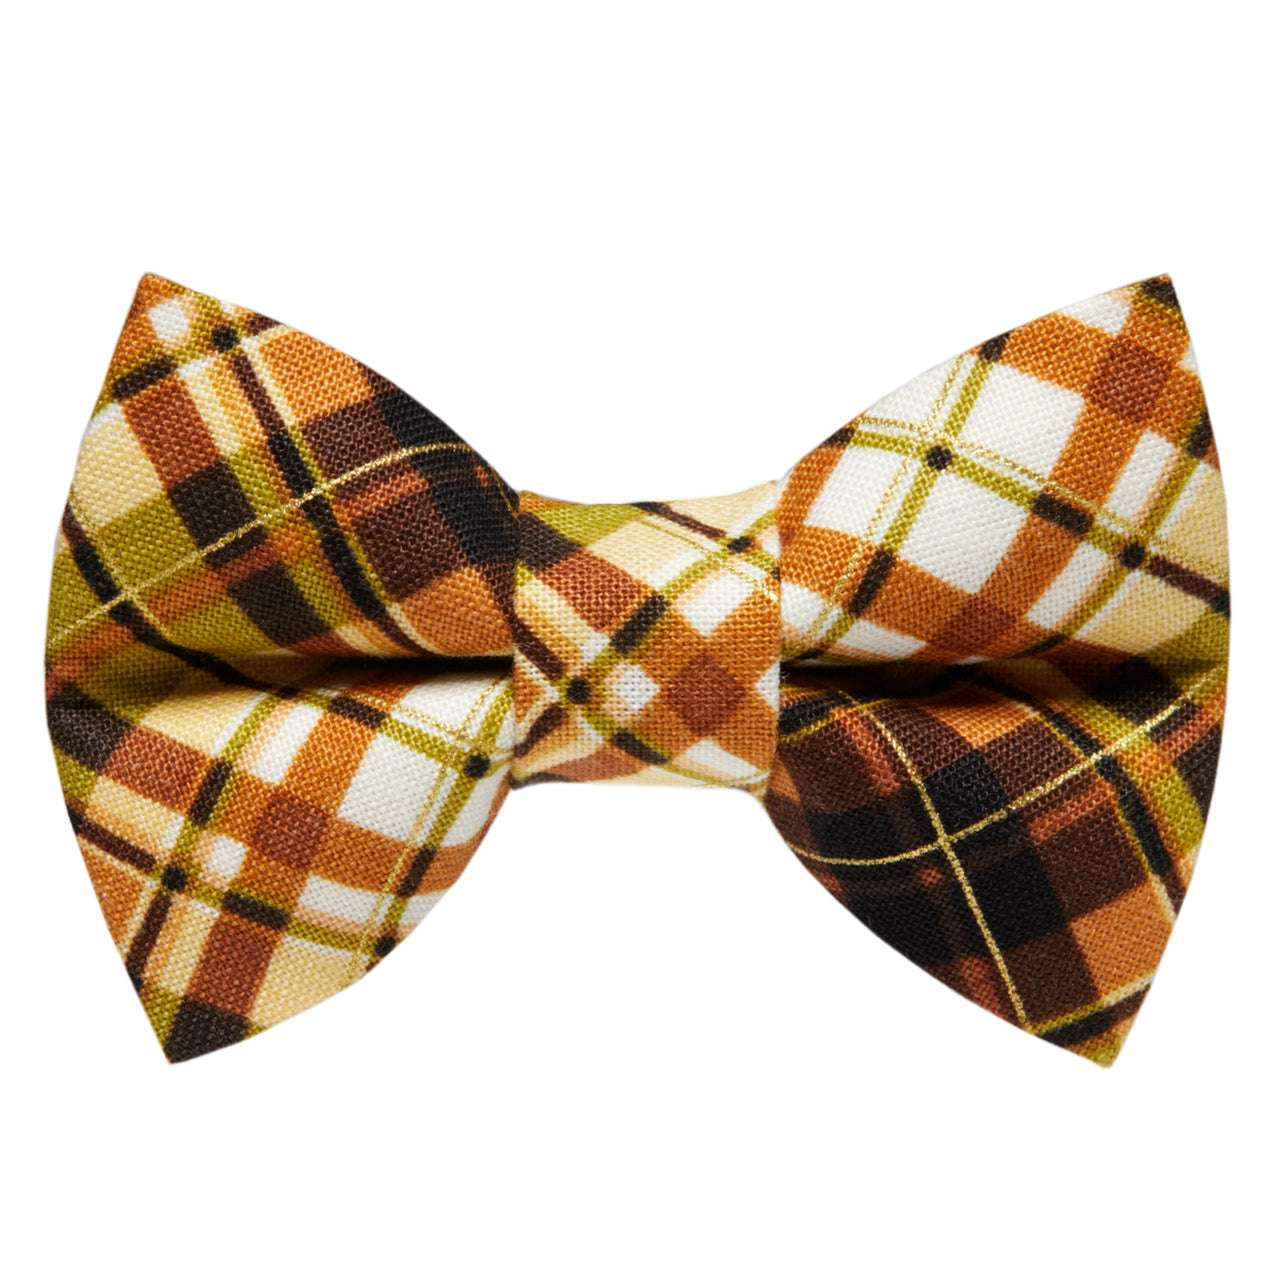 The Anchorman - Cat / Dog Bow Tie